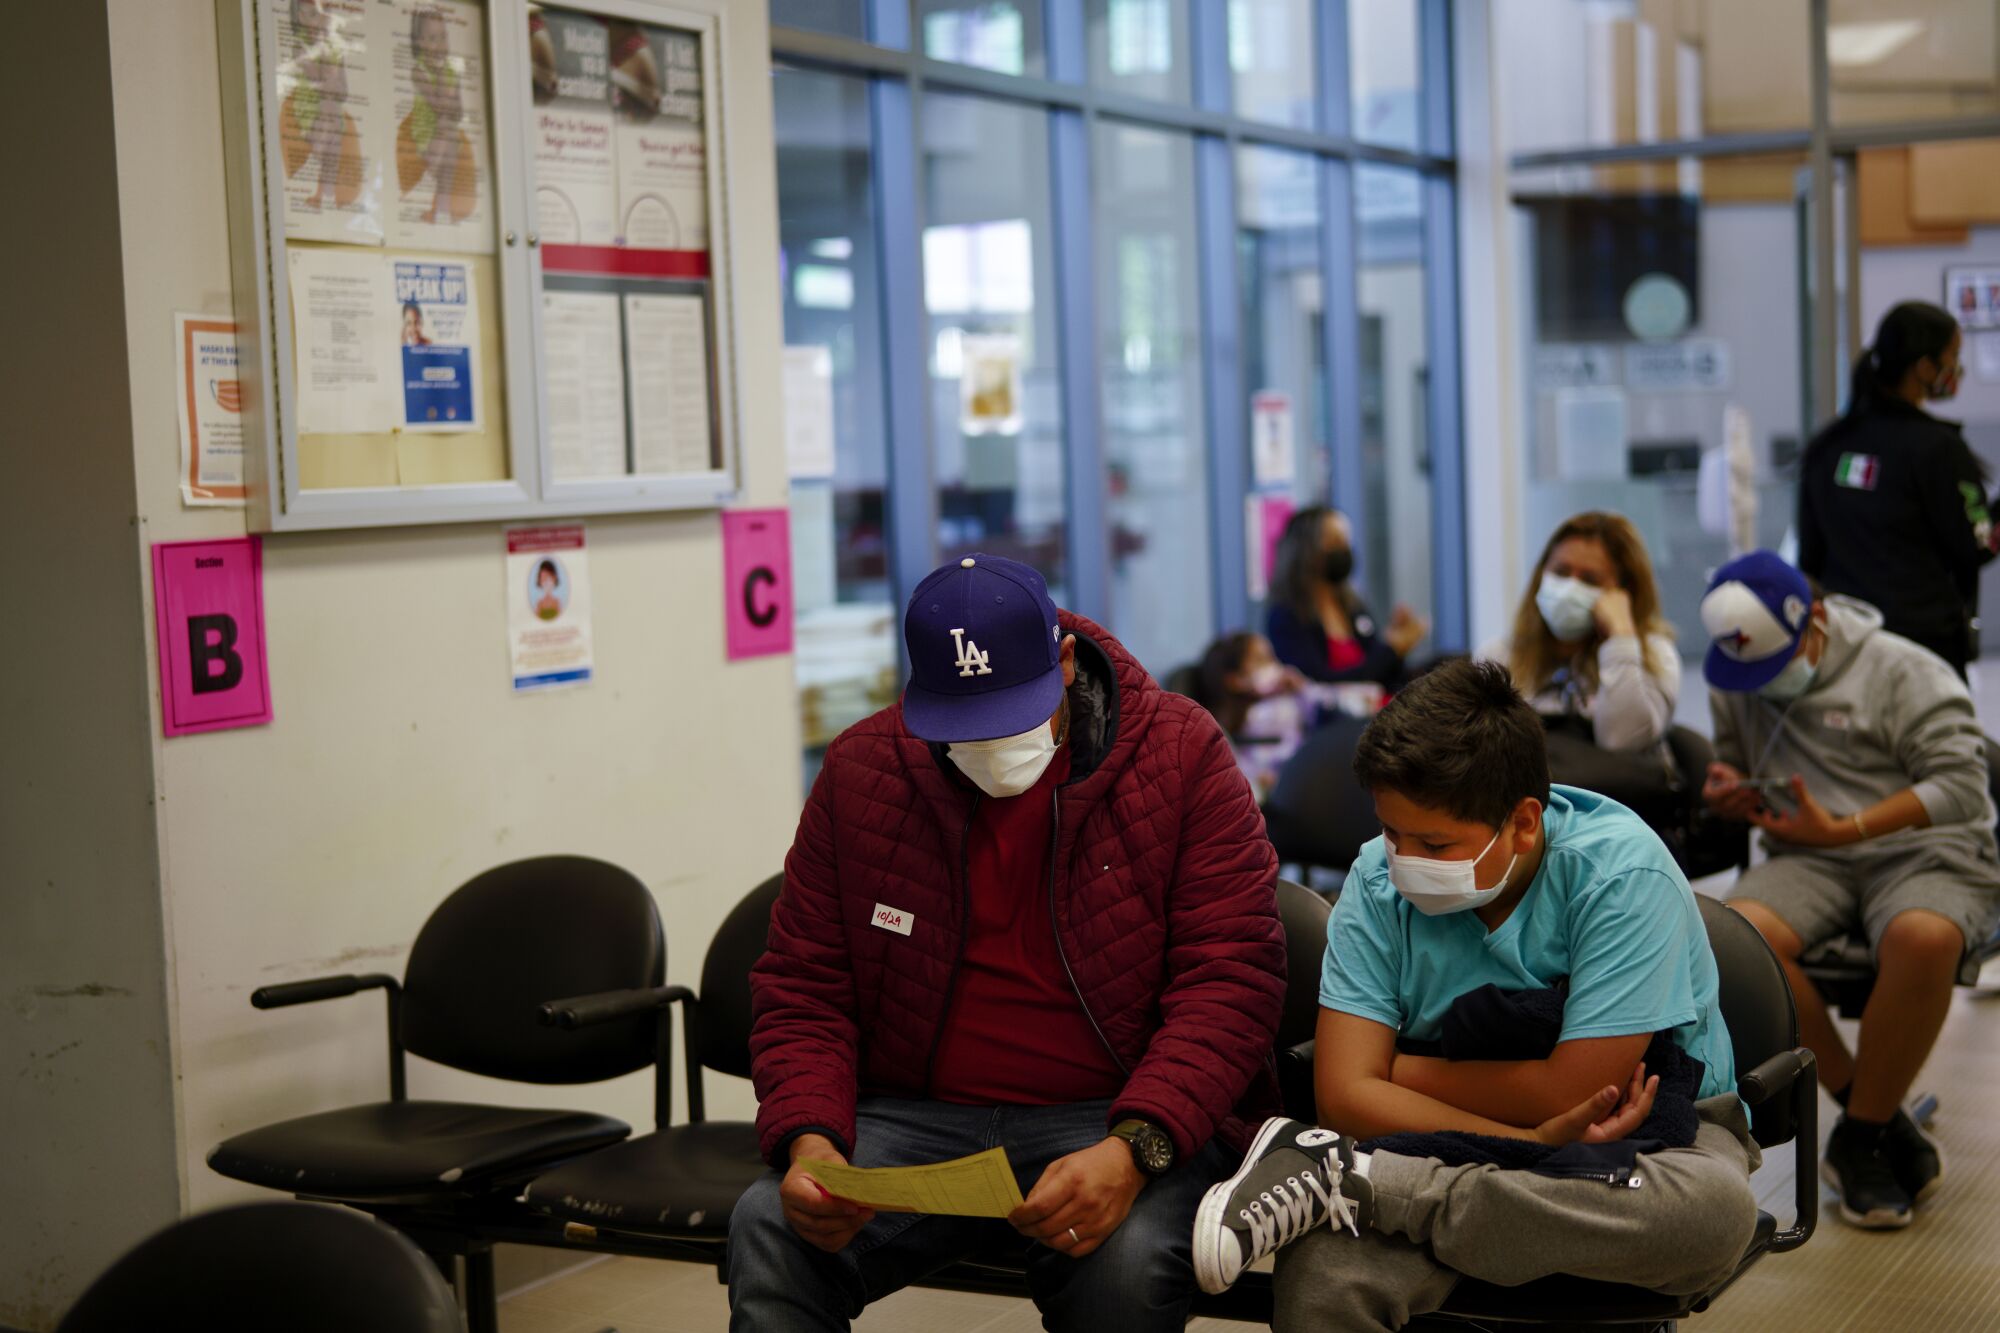 Julio Ibarra waited with his son, Julio Ibarra, Jr., to receive the flu vaccine.